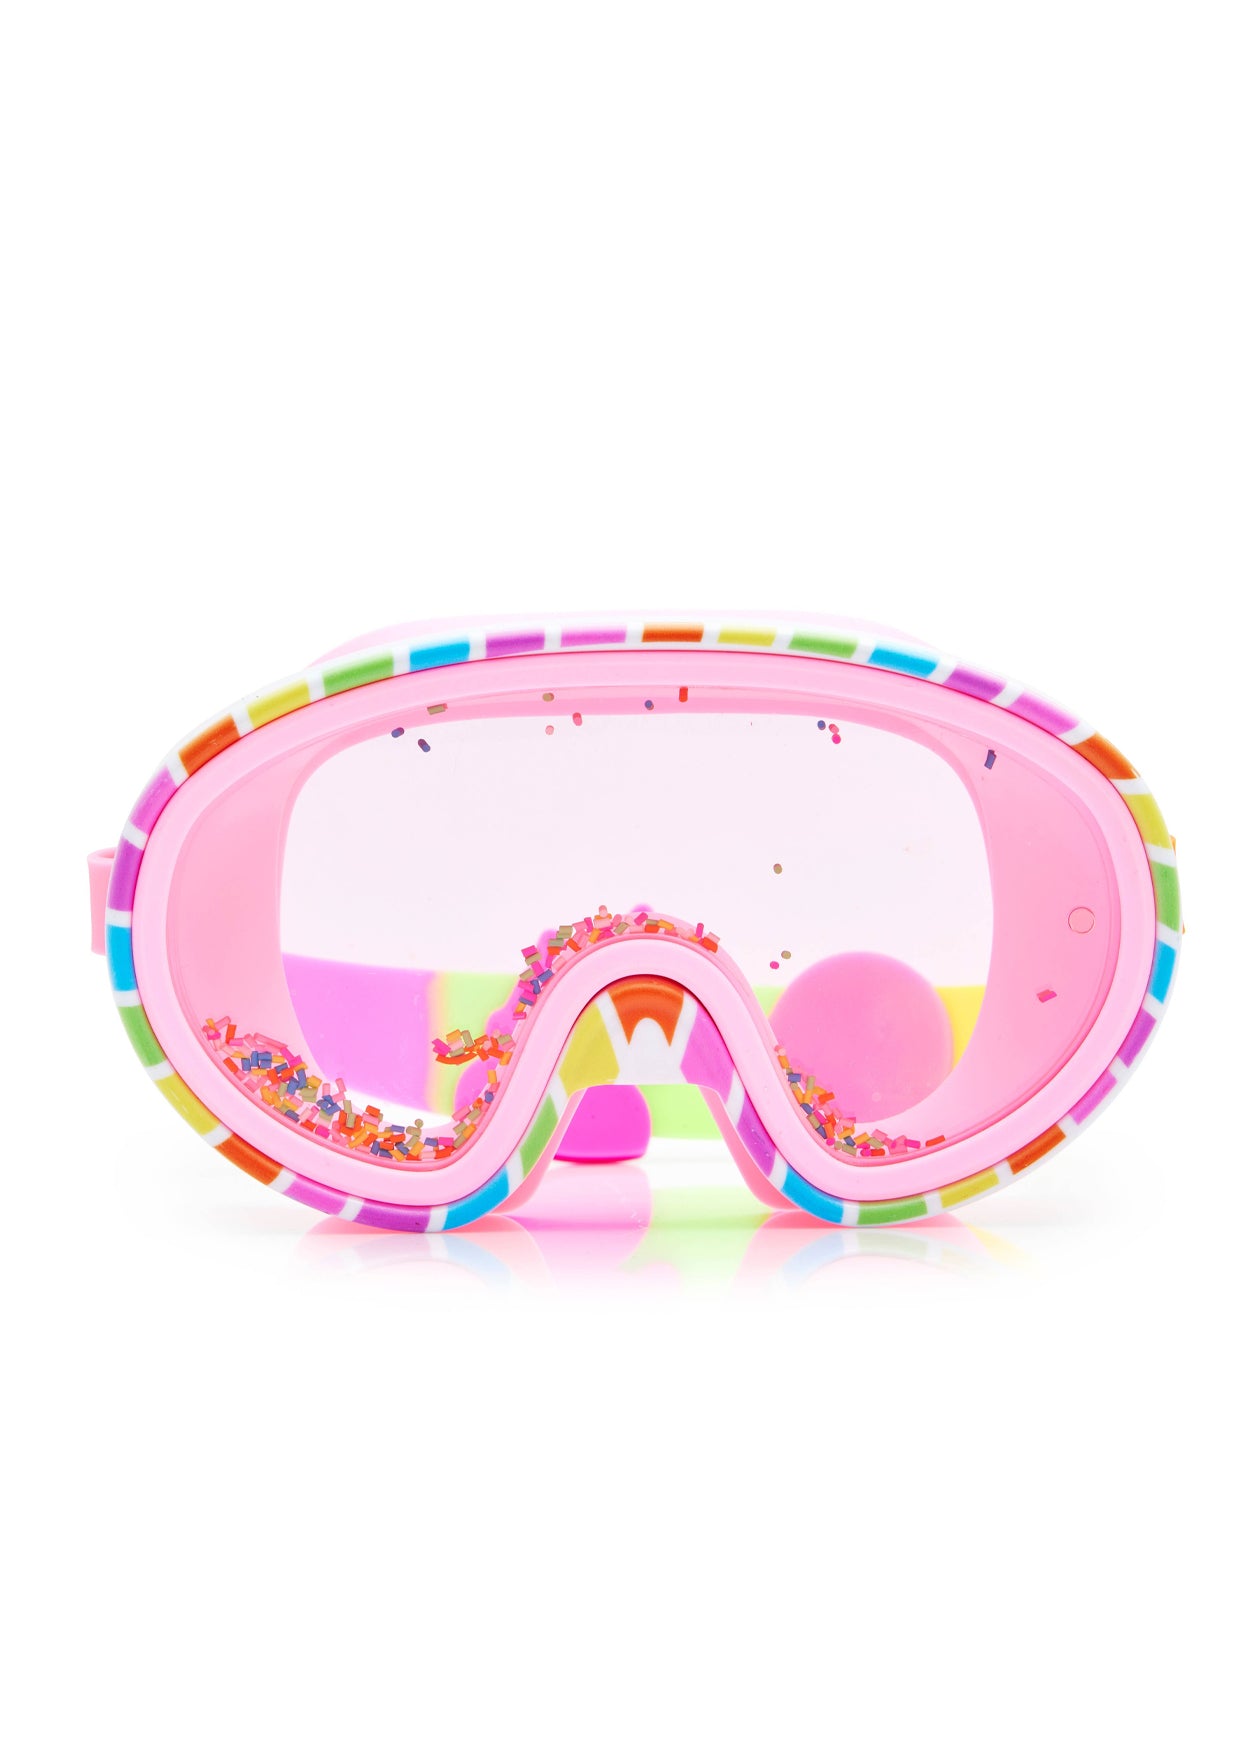 Swimming Goggles Mask Sprinkle